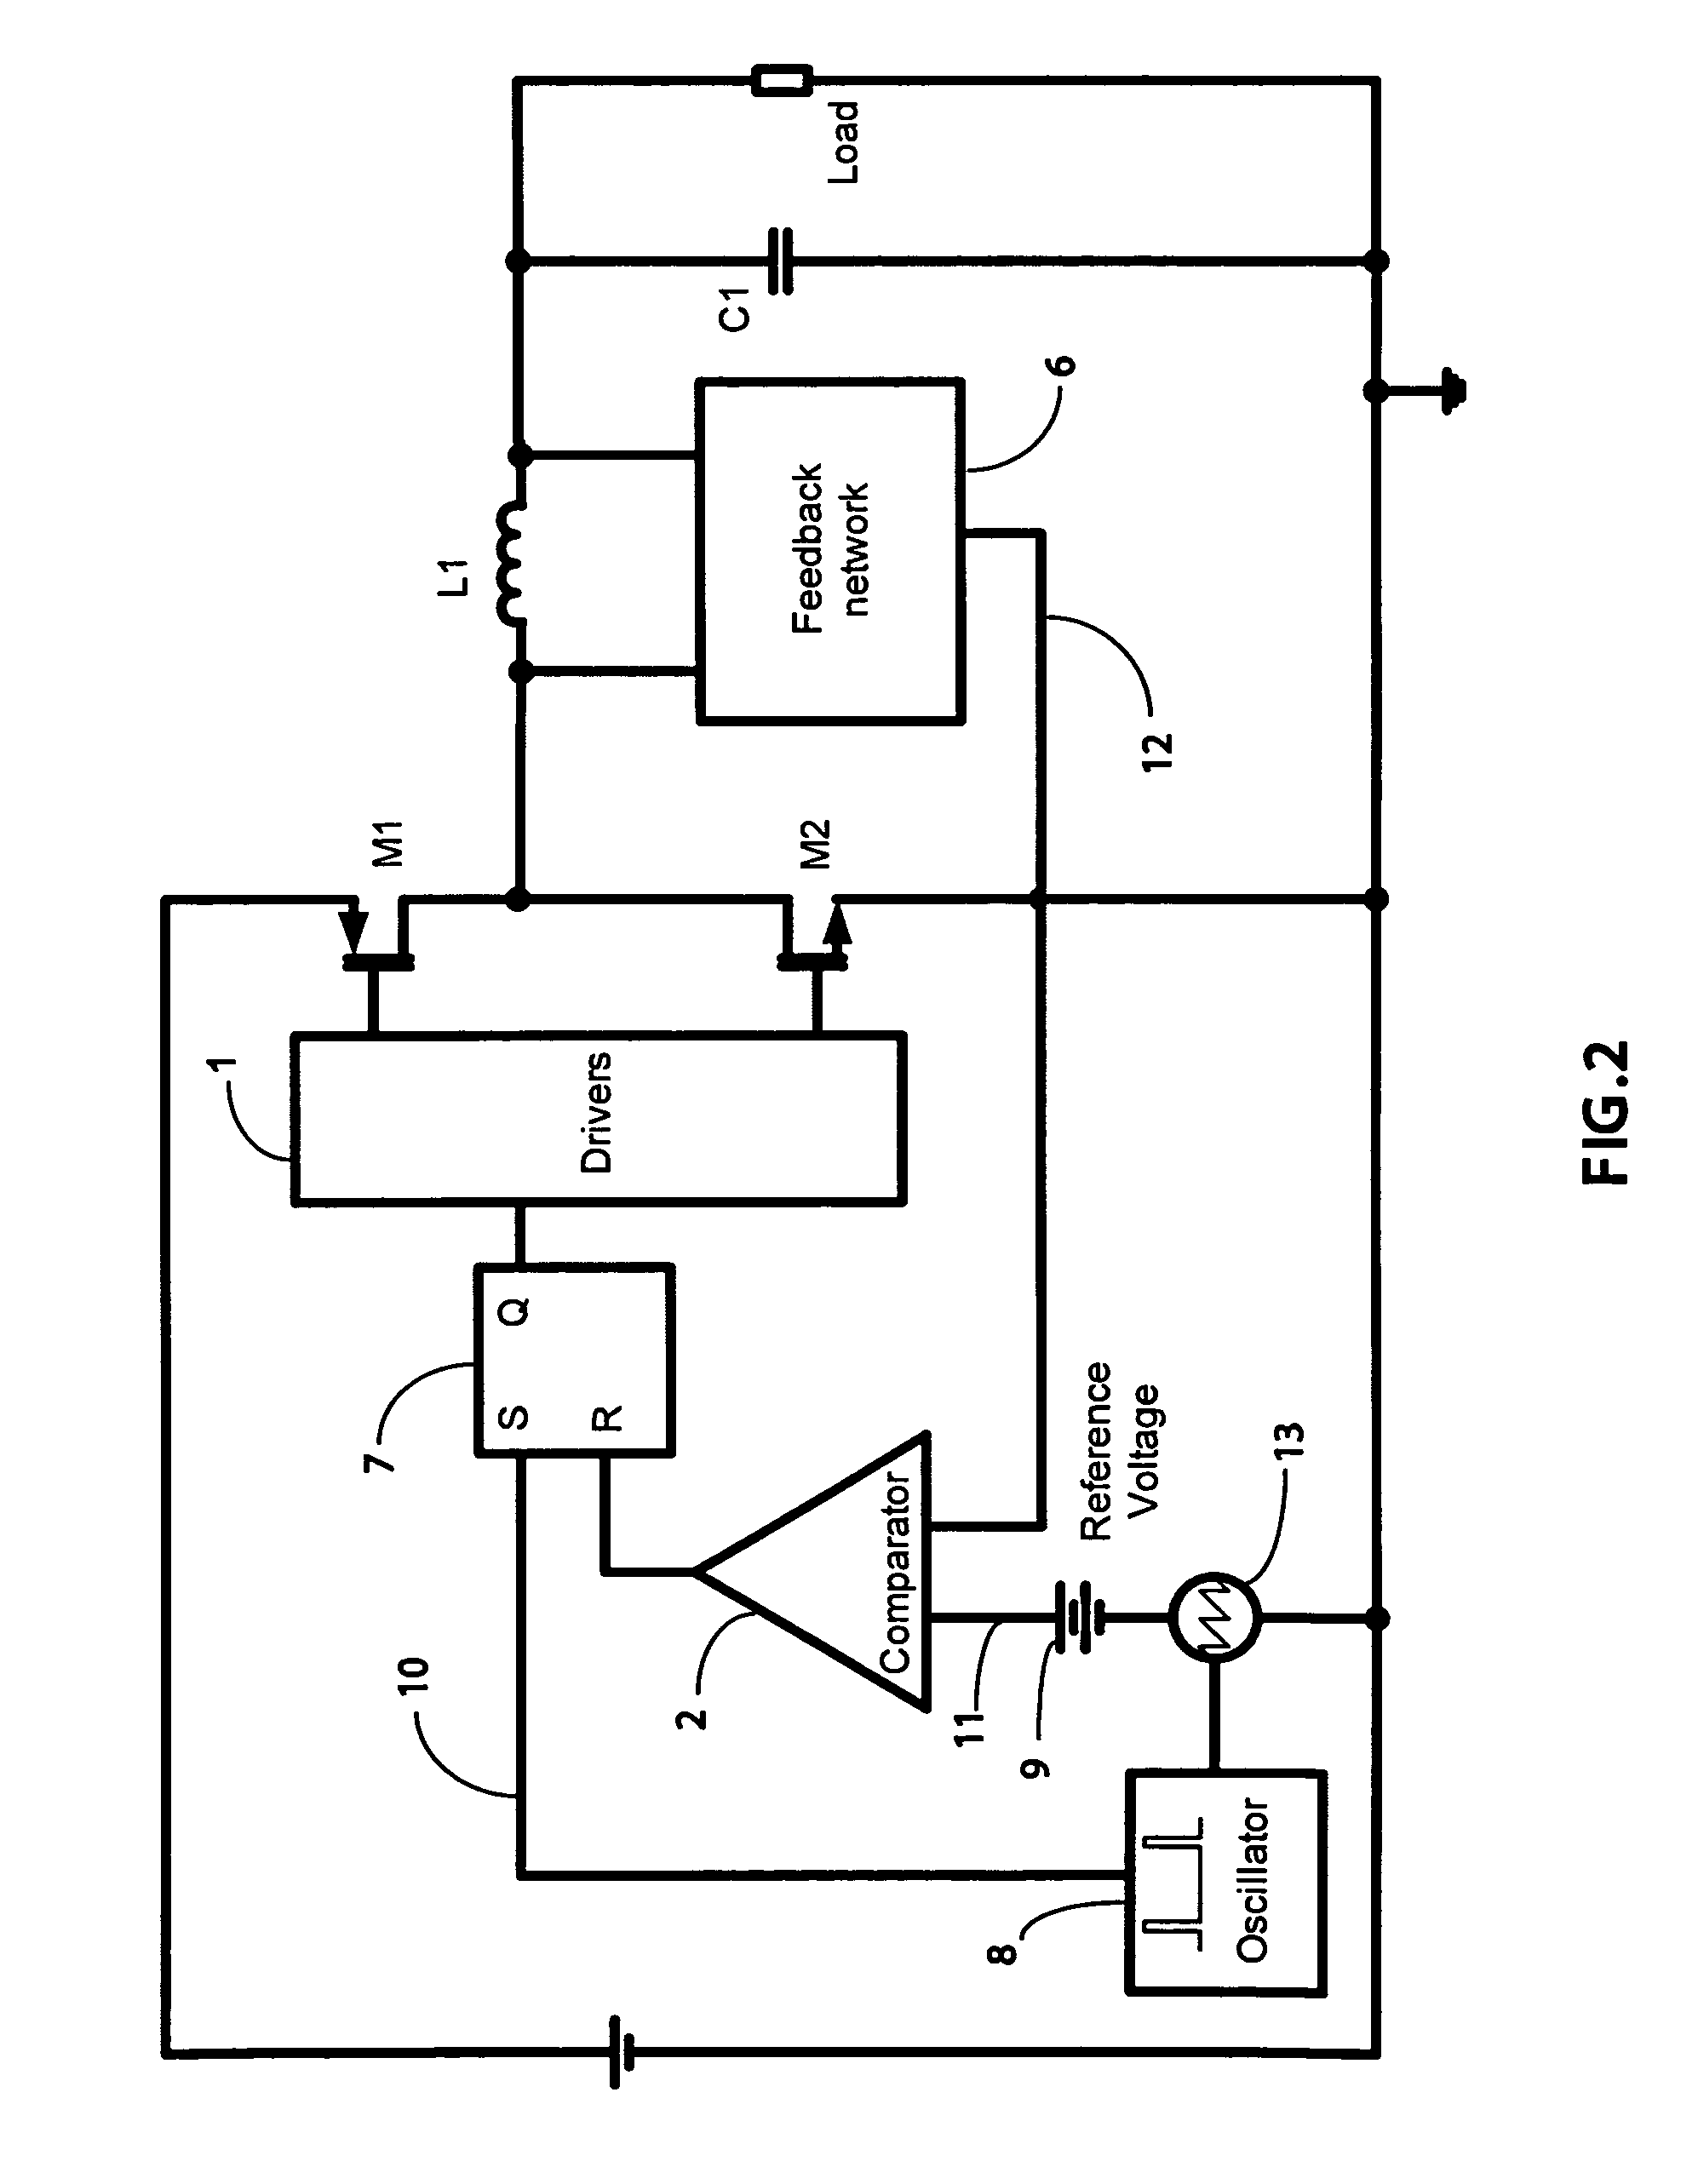 Constant frequency synthetic ripple power converter